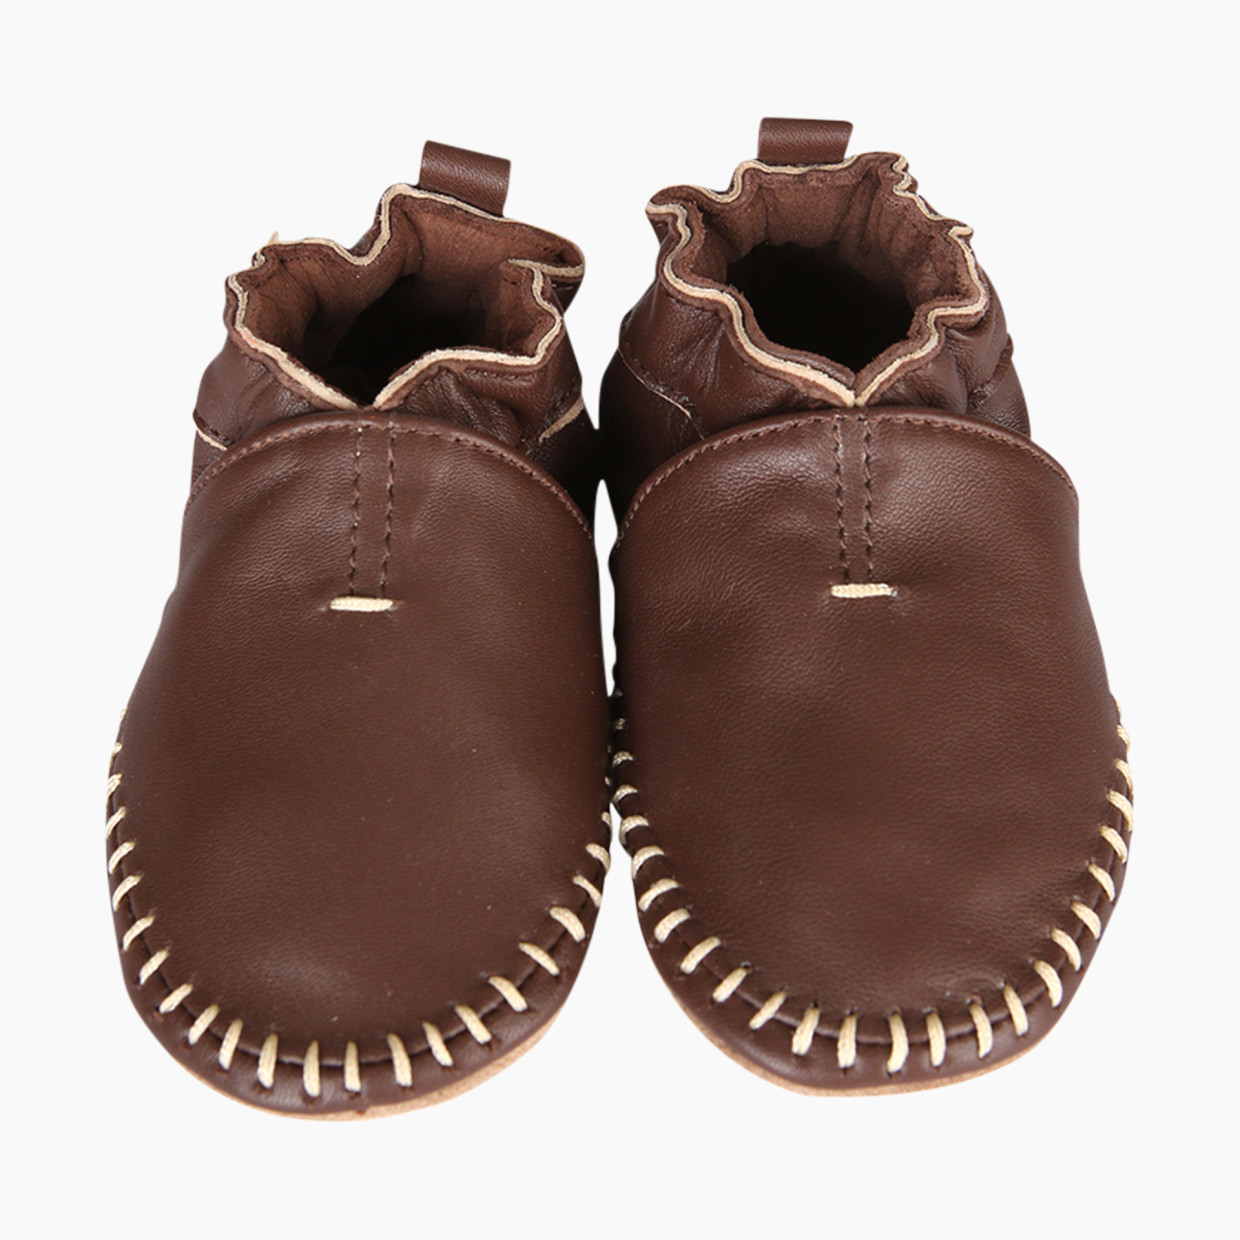 Robeez Classic Moccasins - Brown, 0-6 Months.